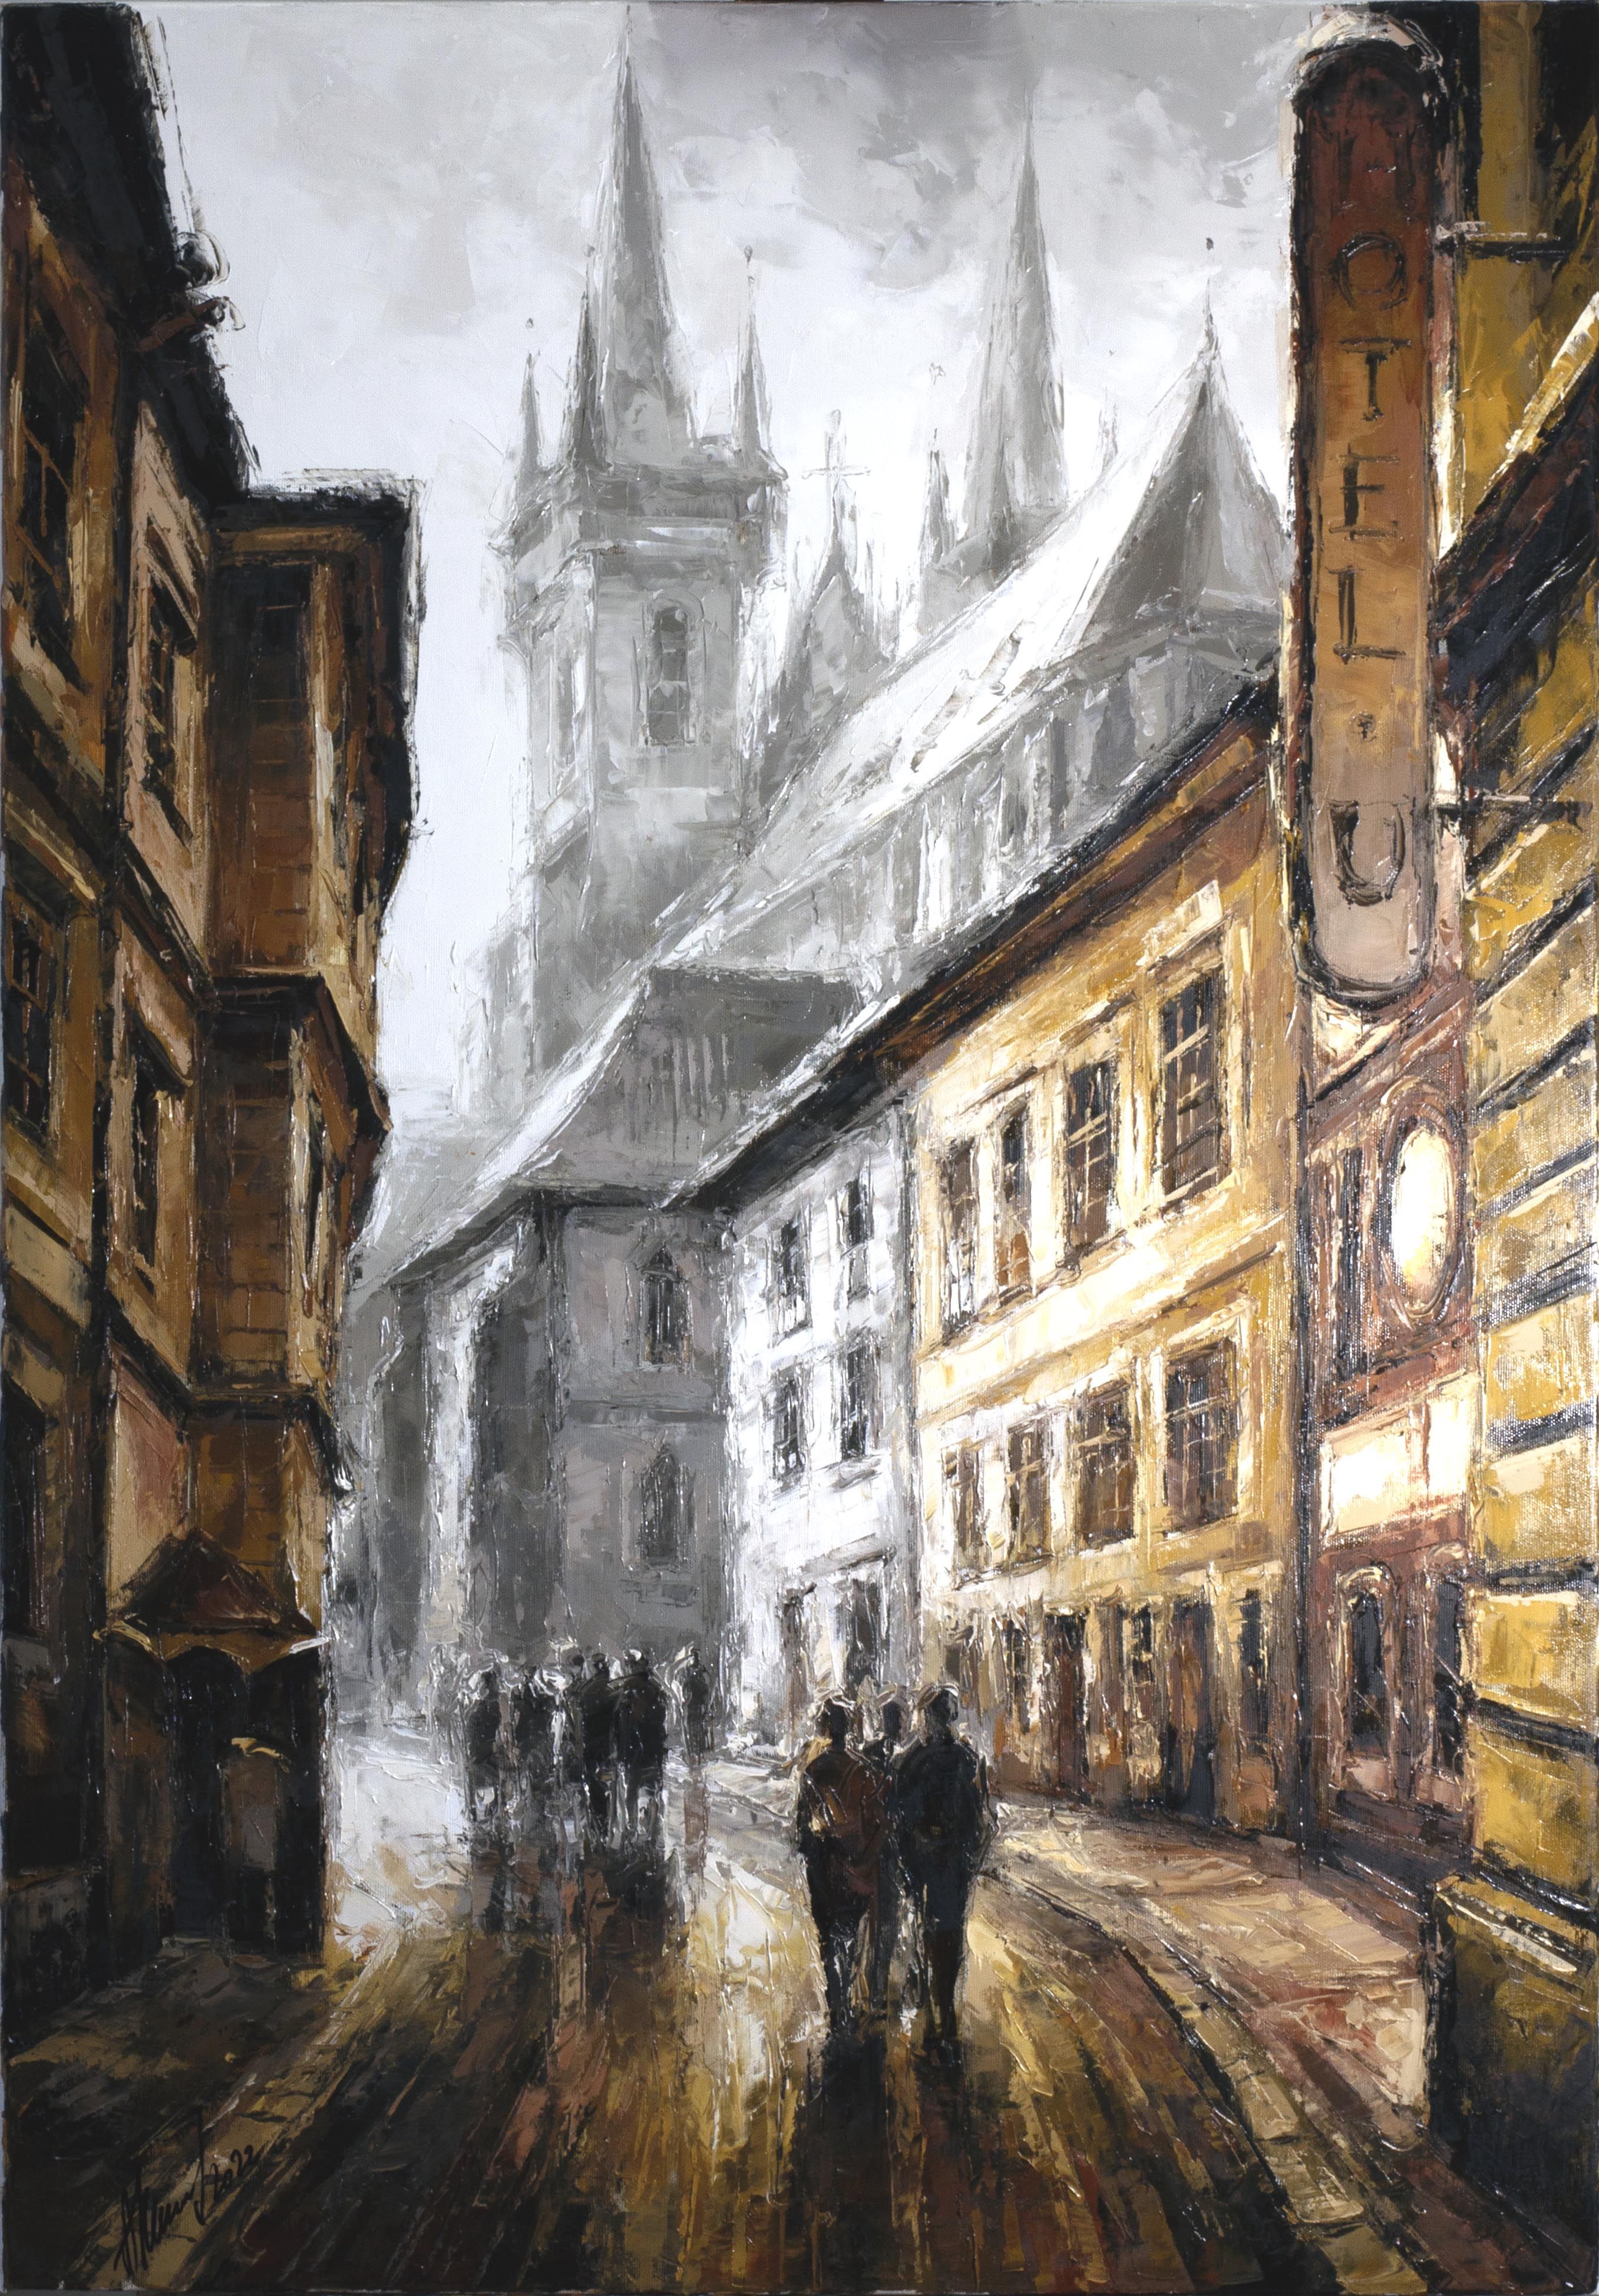 Streets of the old city. Prague hotels in the old town. Painting with a palette knife. Cortina in ocher colors.